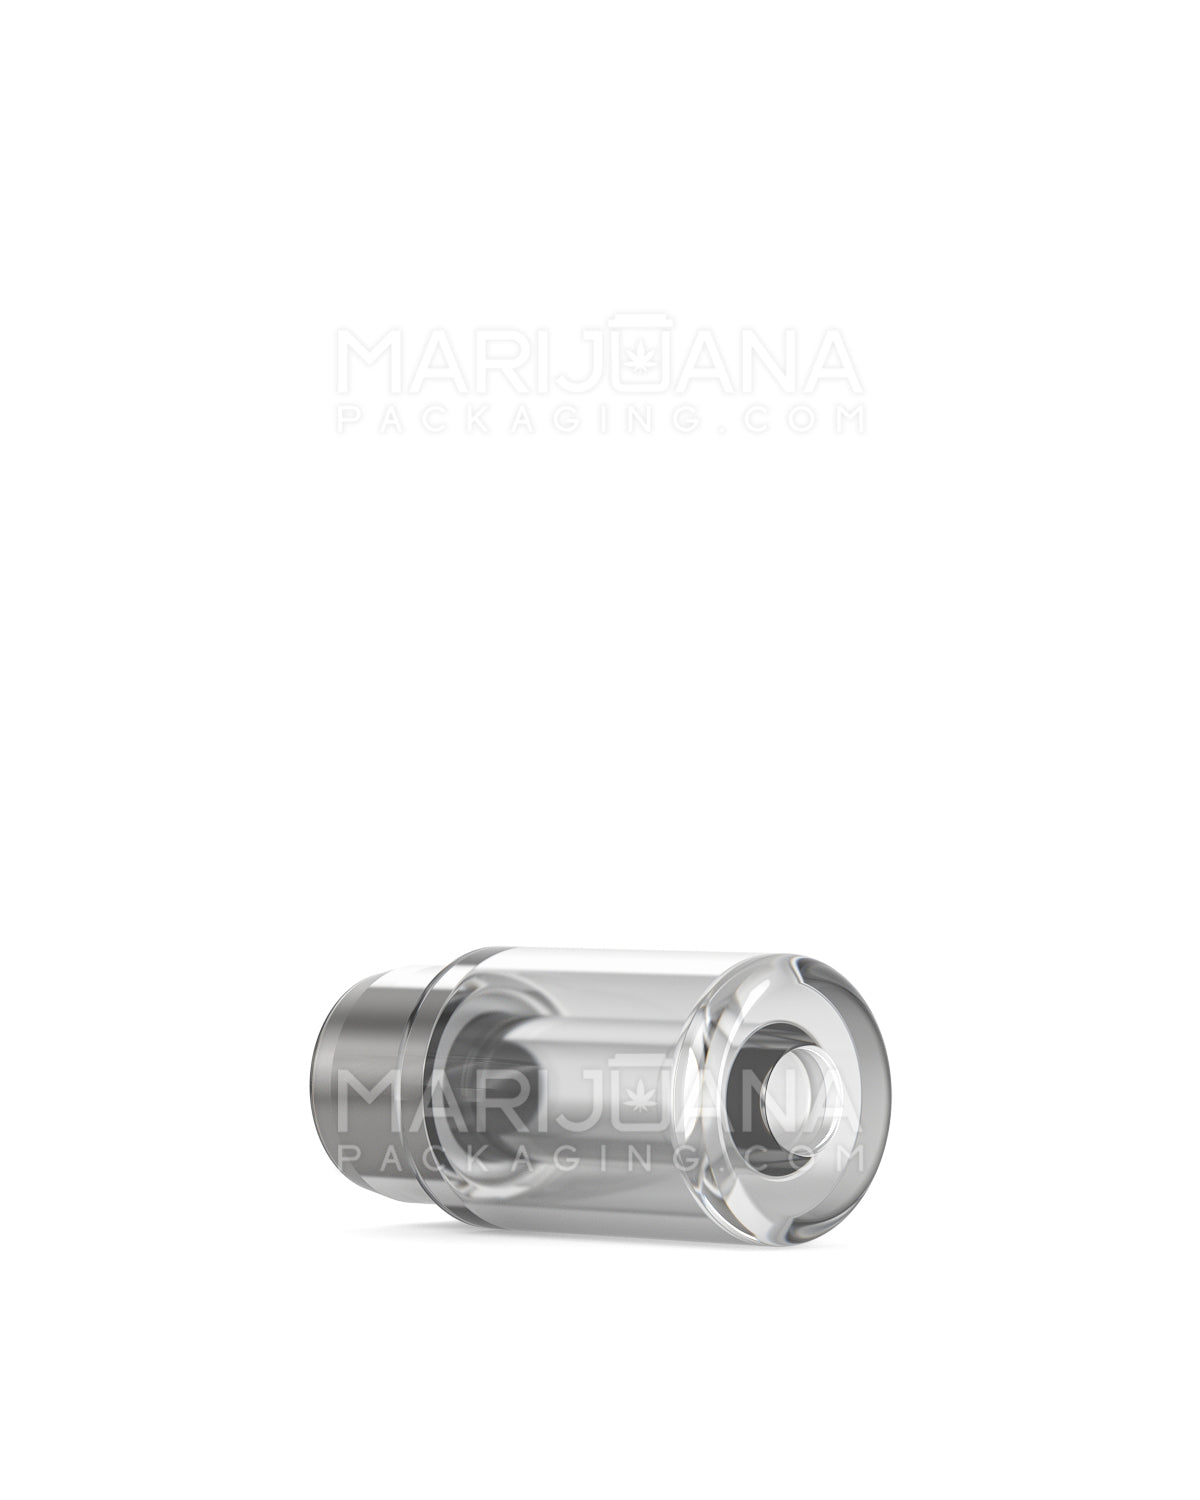 AVD | Barrel Vape Mouthpiece for GoodCarts Plastic Cartridges | Clear Plastic - Press On - 600 Count - 5